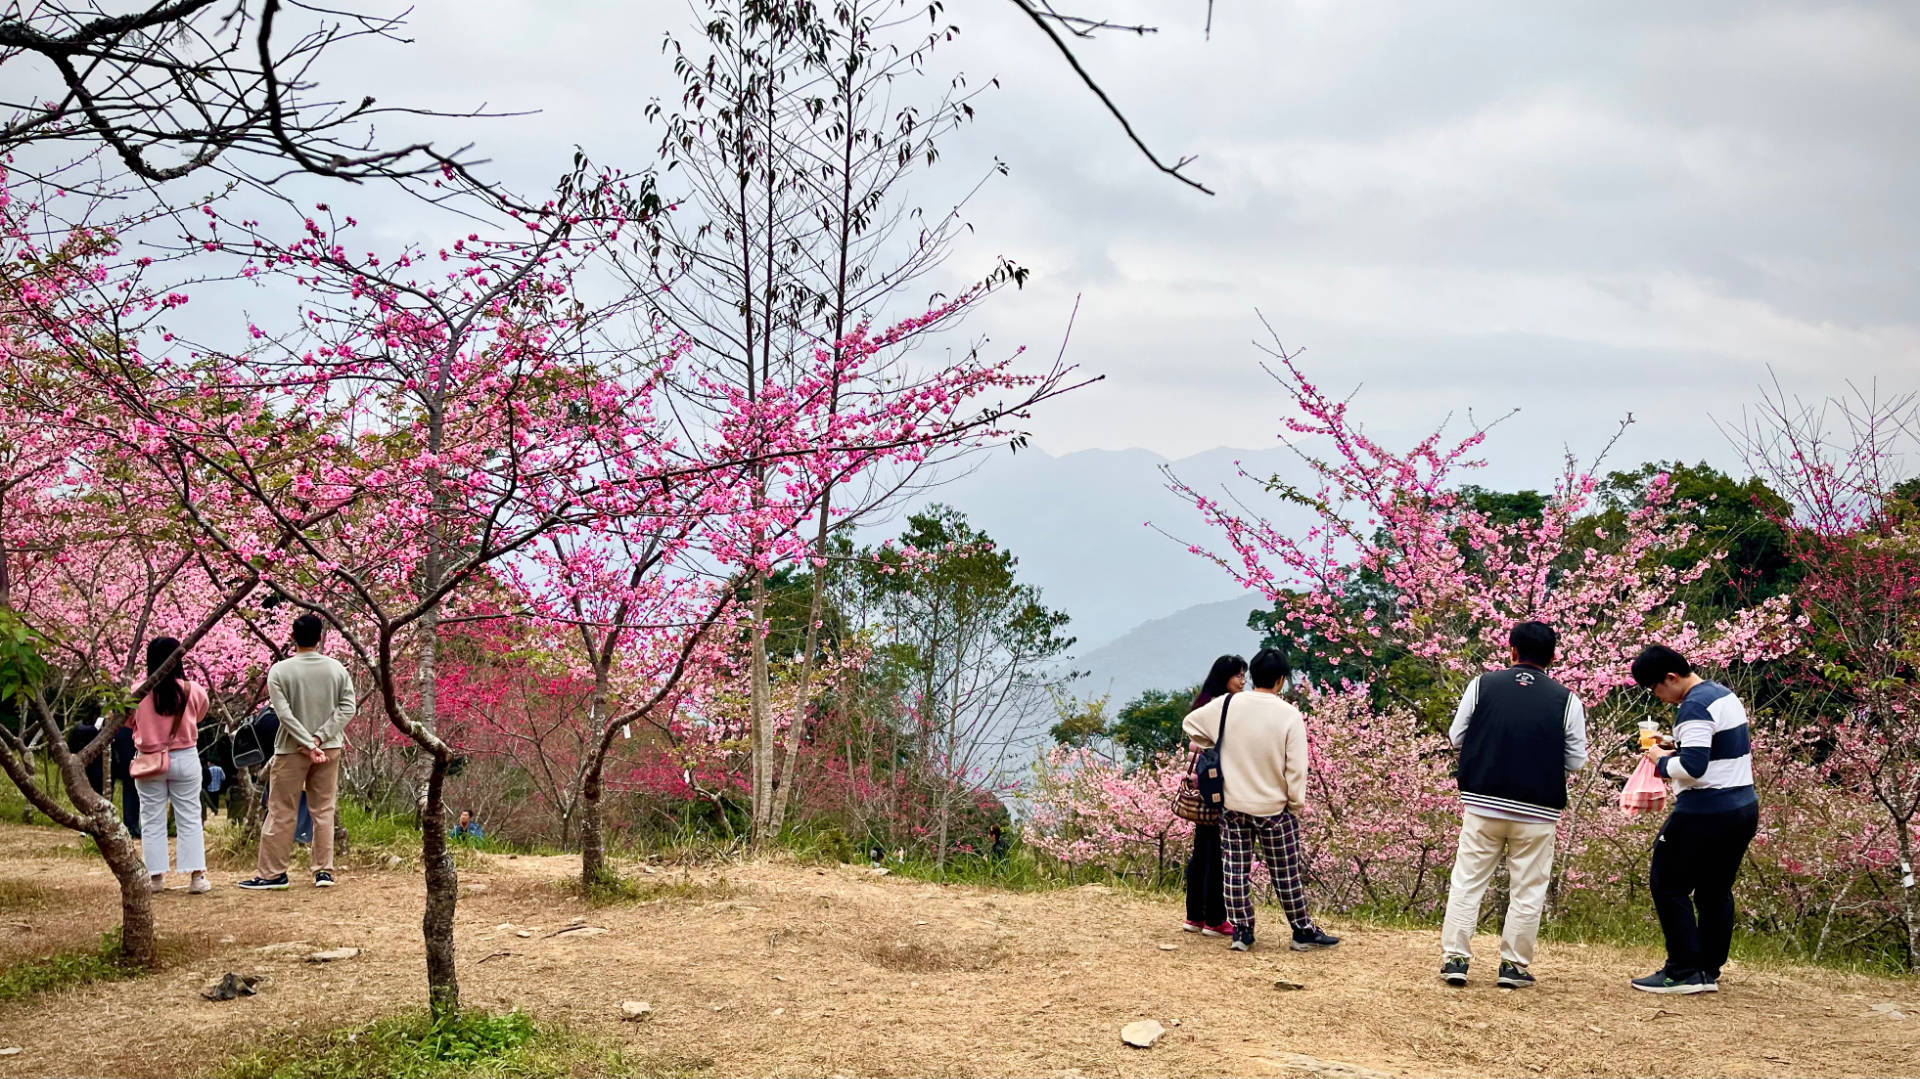 Two groups of people underneath blossoming trees, with hazy mountains visible in the distance.